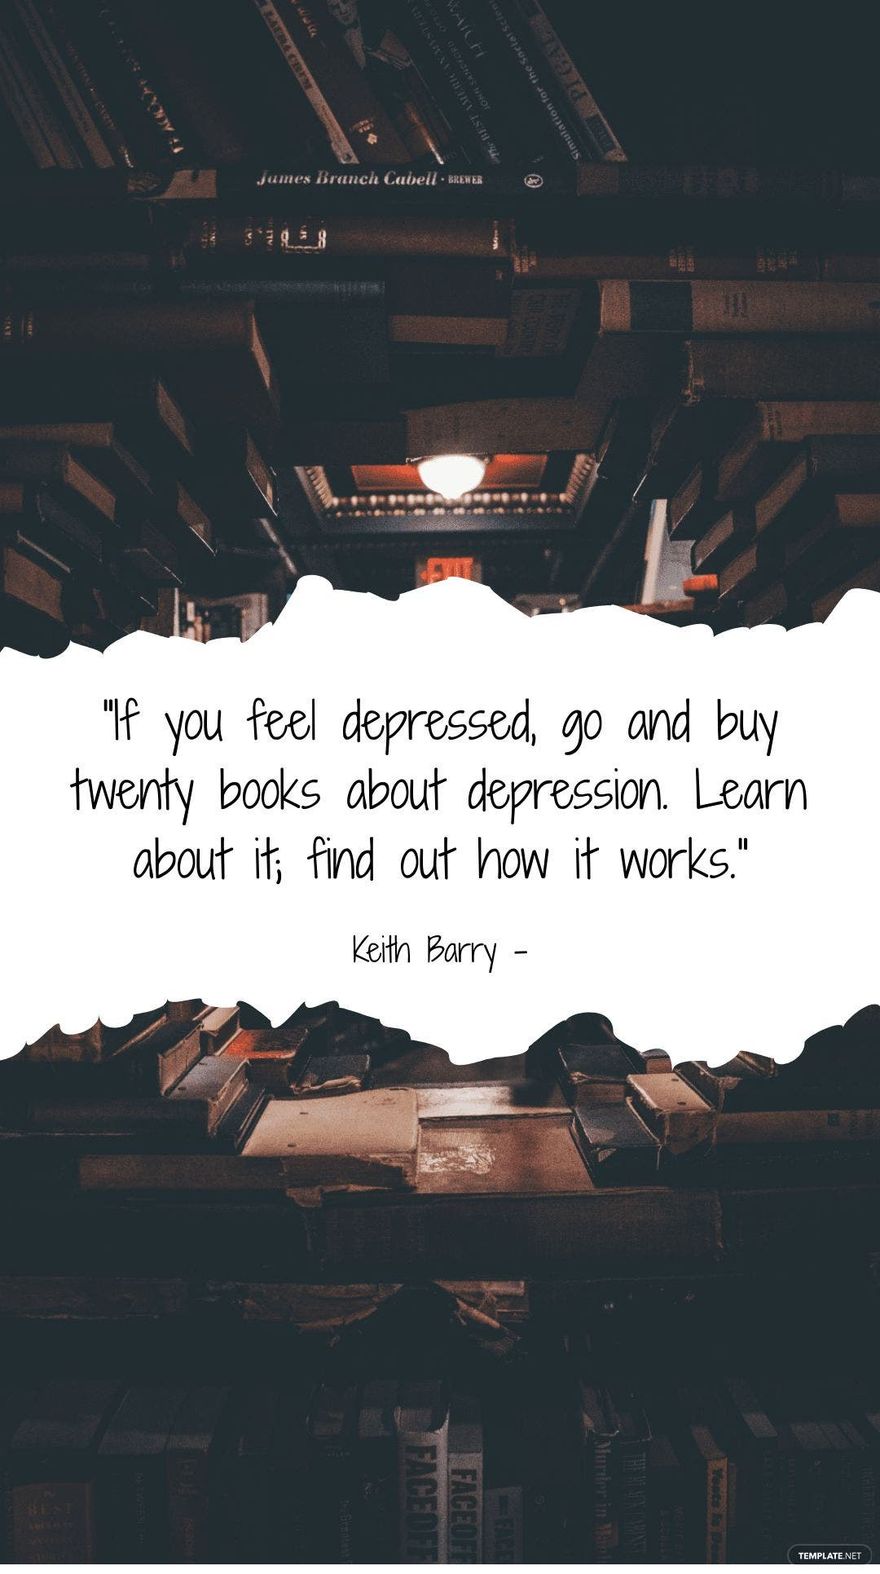 Keith Barry - If you feel depressed, go and buy twenty books about depression. Learn about it; find out how it works.